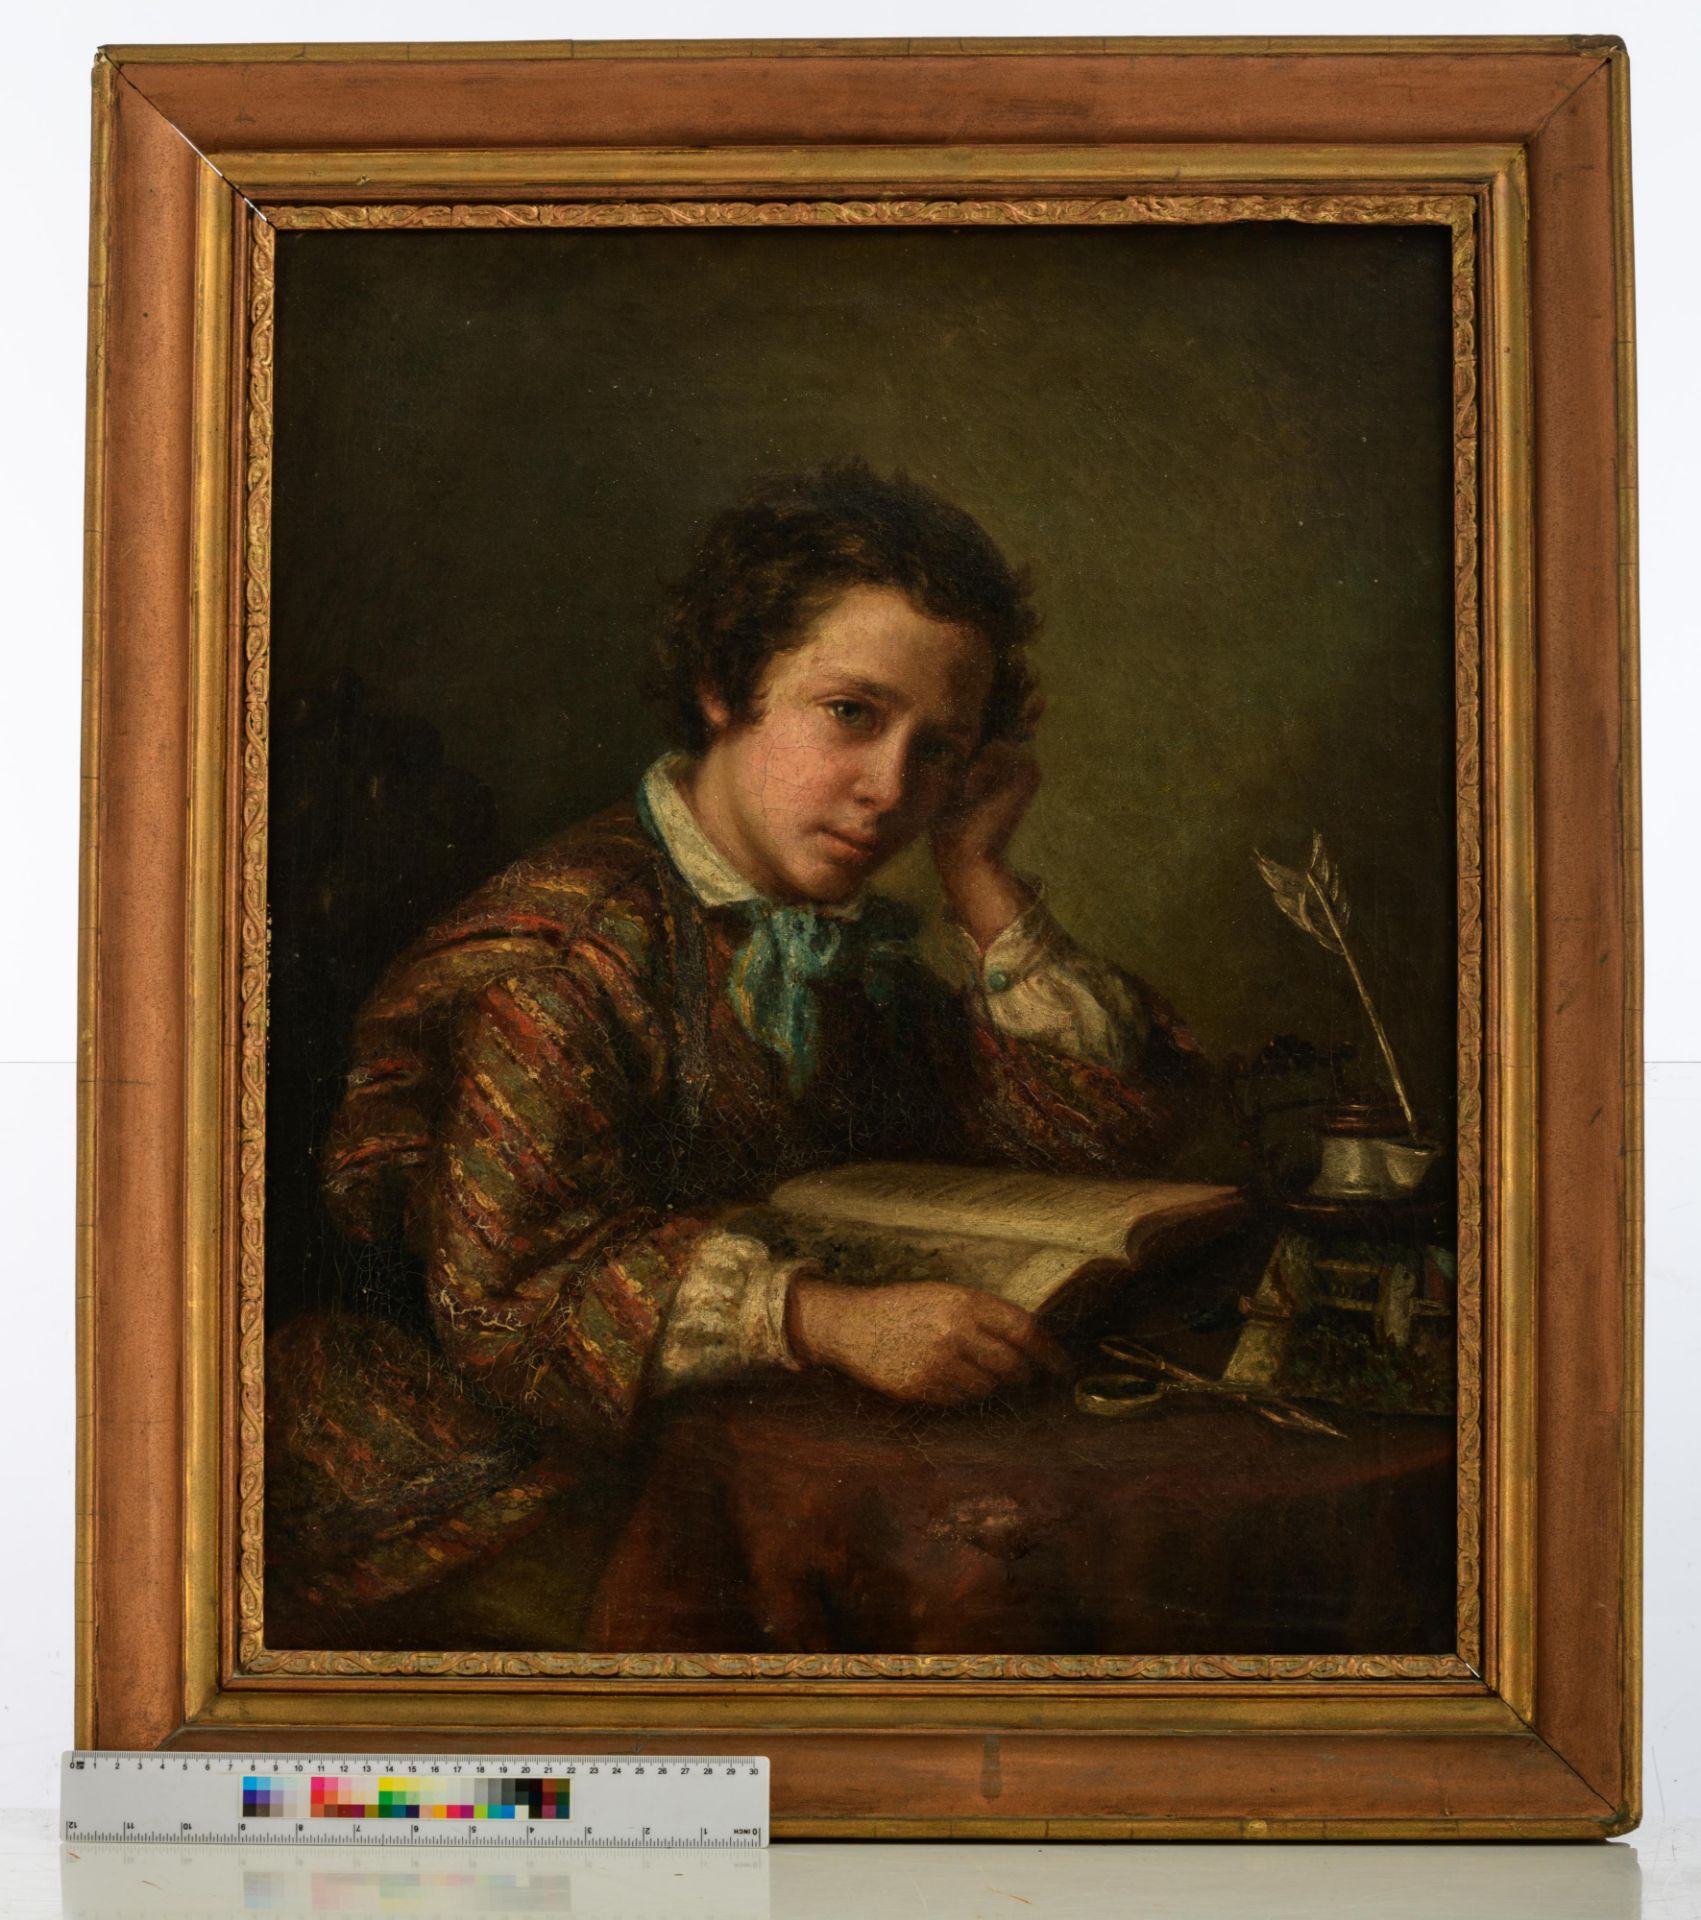 No visible signature,ÿa young man dedicated to his study, 19thC, oil on canvas, 53 x 65 cm - Image 4 of 8